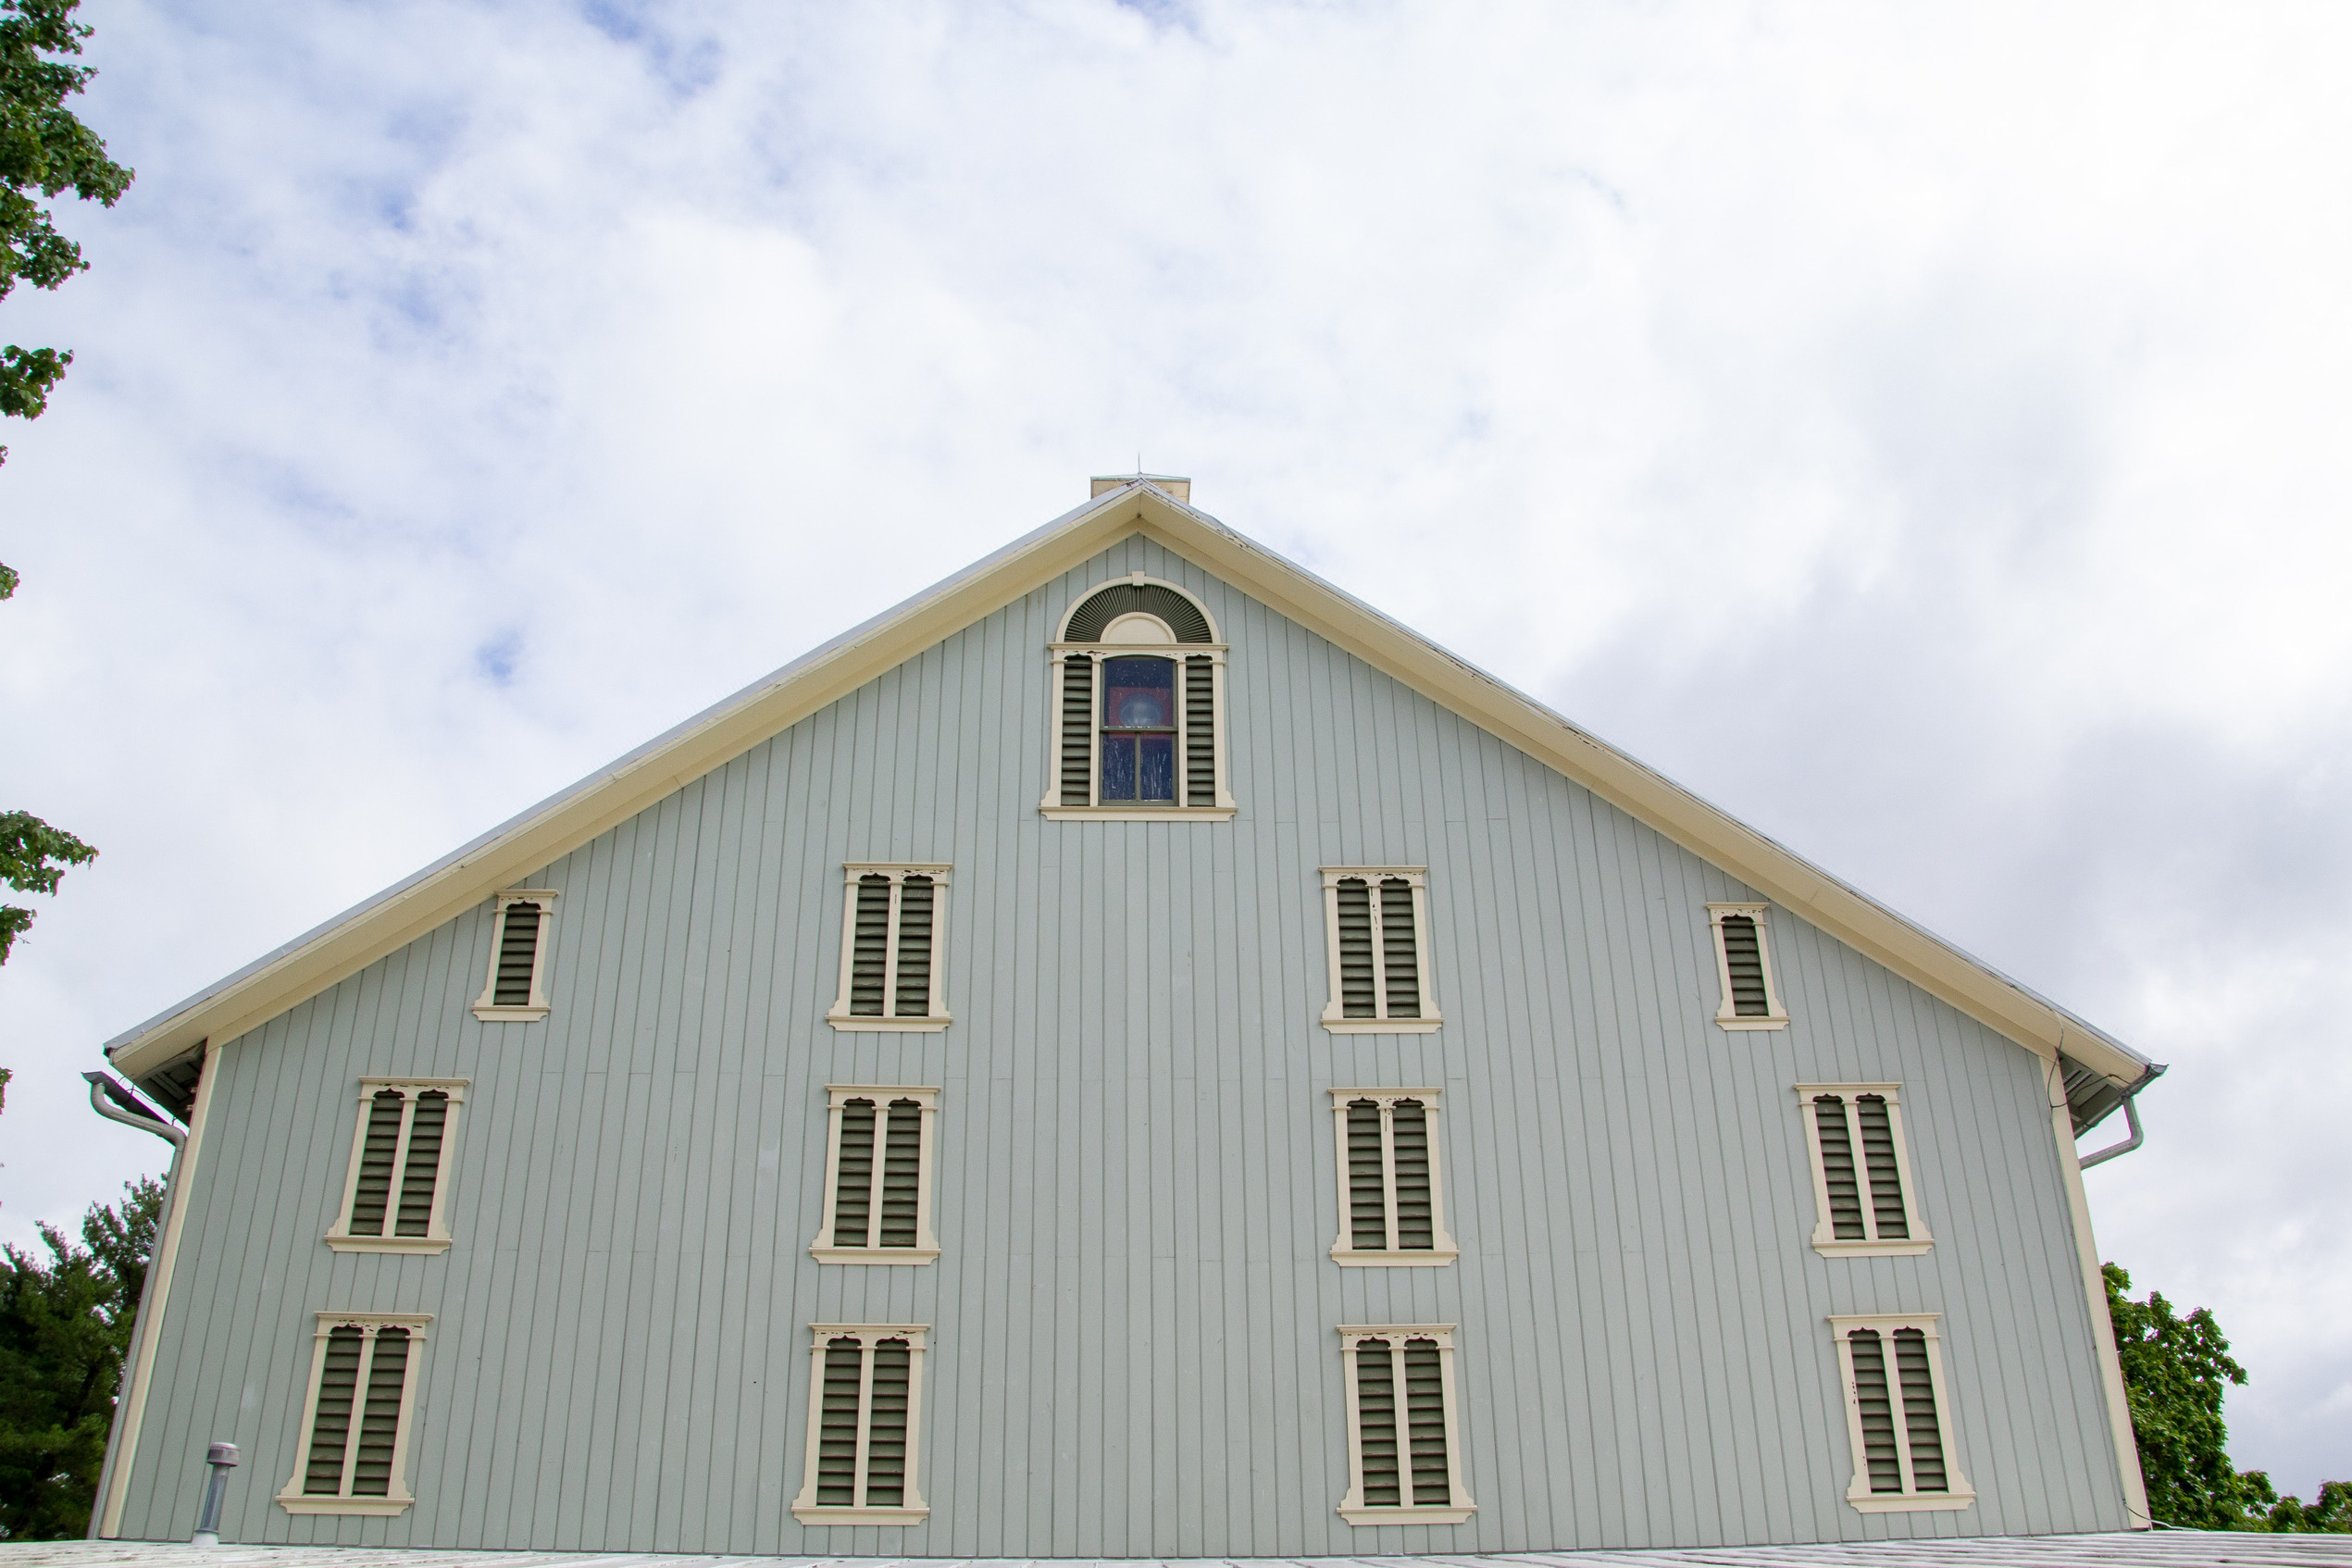 A side of a blue painted barn with a window at the top with a floodlight in it.